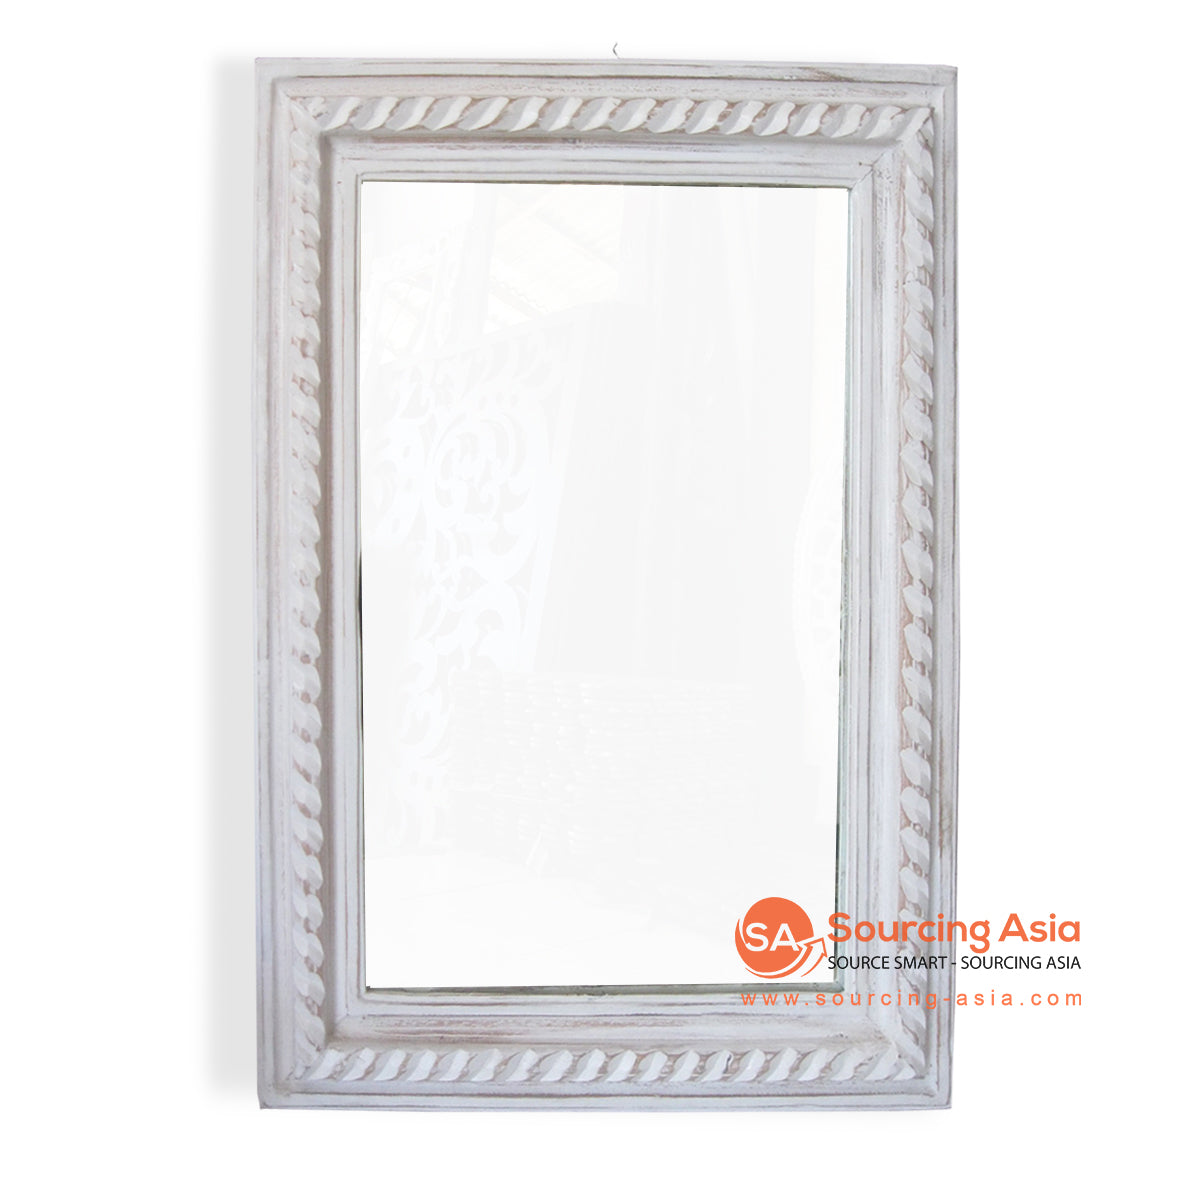 SSU050-60WW WHITE WASH WOODEN MIRROR WITH CARVING